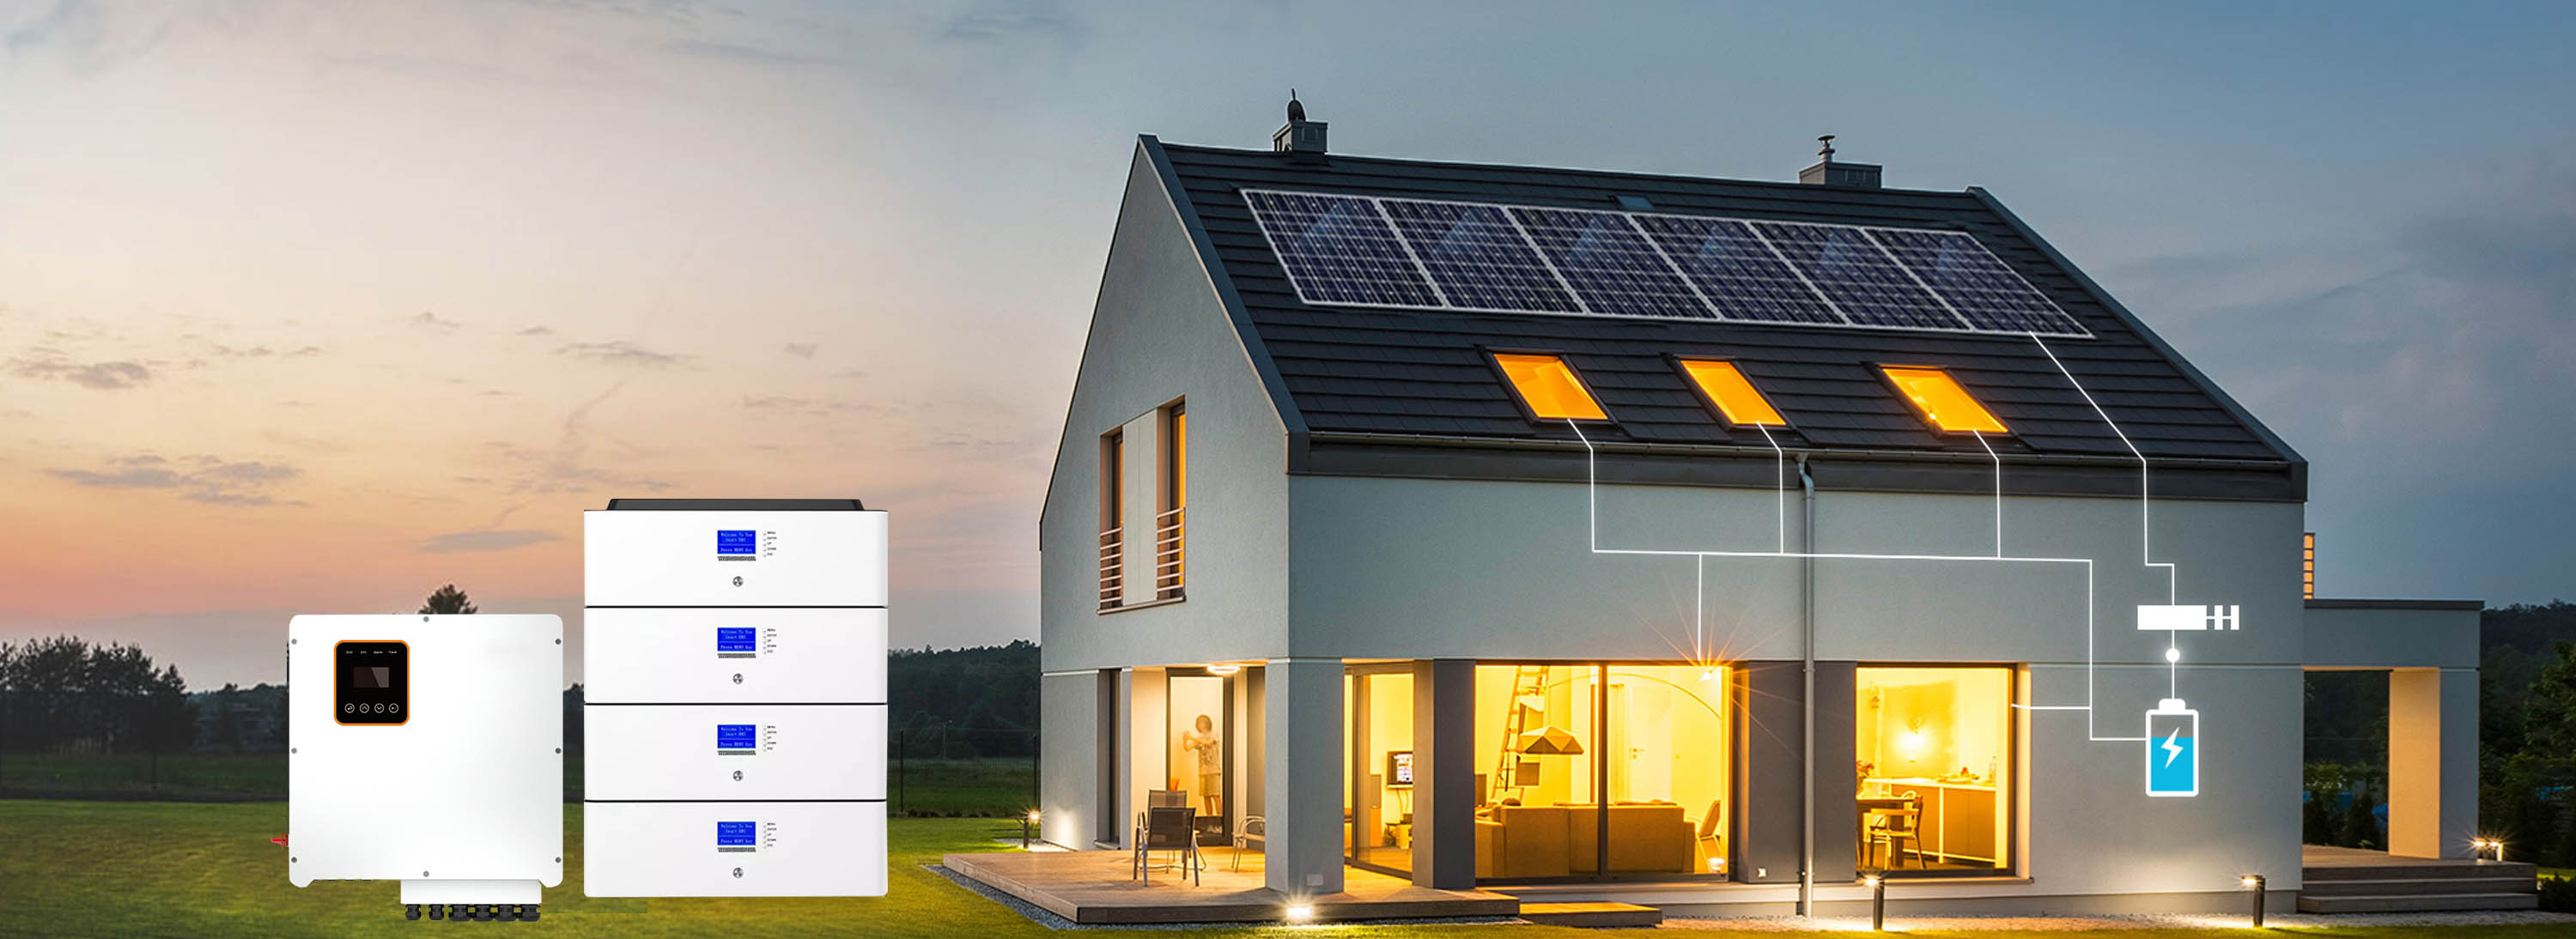 Neliaxi Home energy storage system